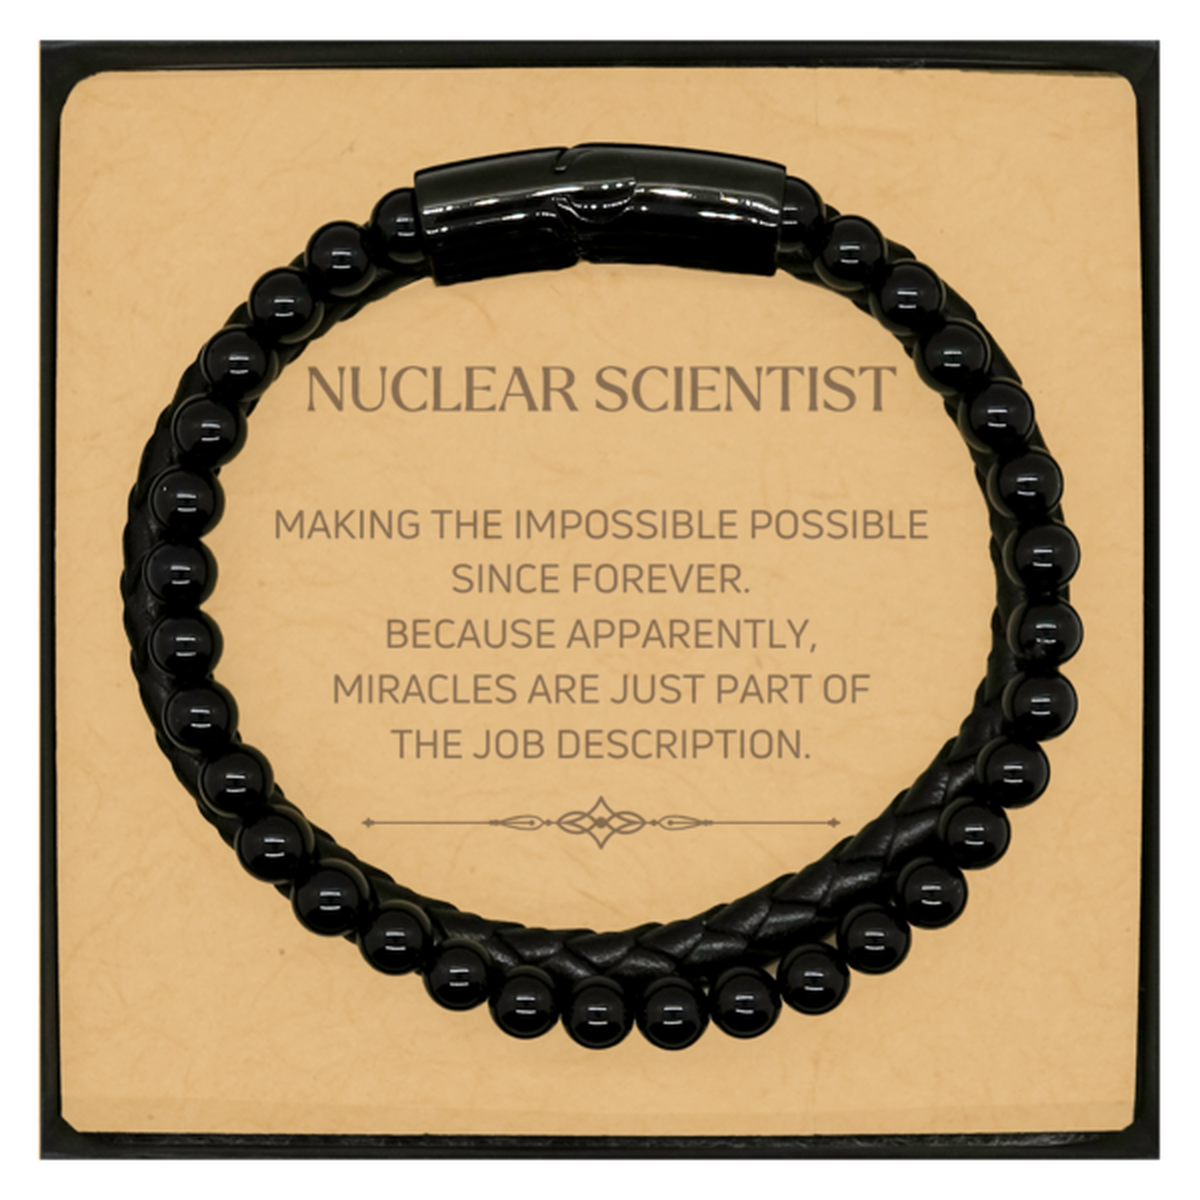 Funny Nuclear Scientist Gifts, Miracles are just part of the job description, Inspirational Birthday Christmas Stone Leather Bracelets For Nuclear Scientist, Men, Women, Coworkers, Friends, Boss